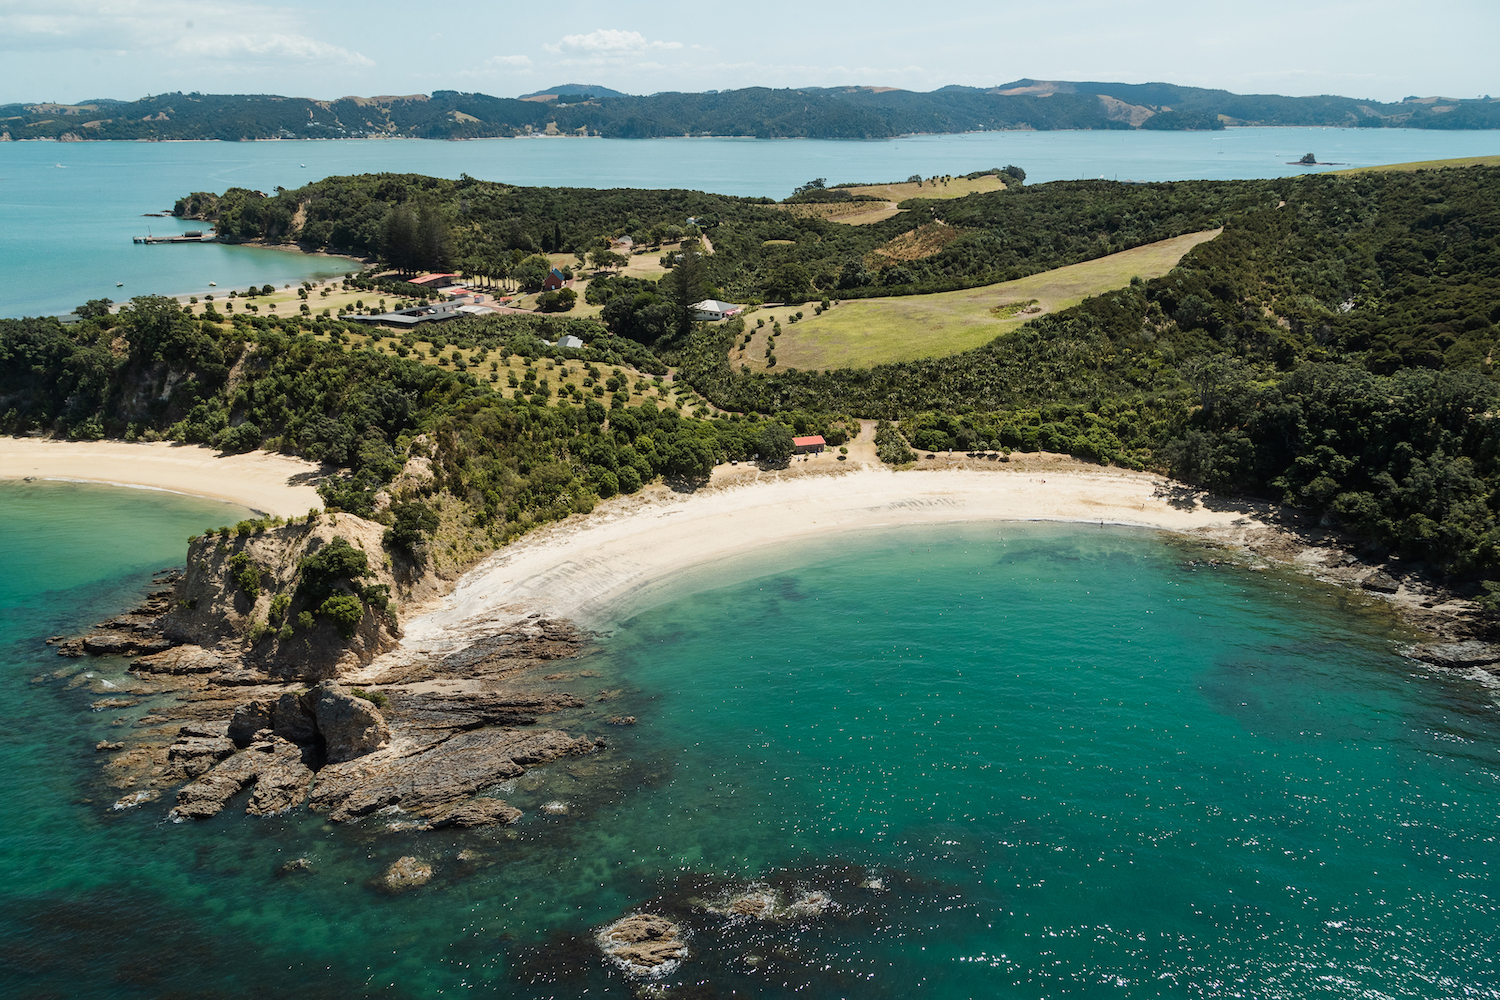 2. rotoroa island from above, view over ladies bay